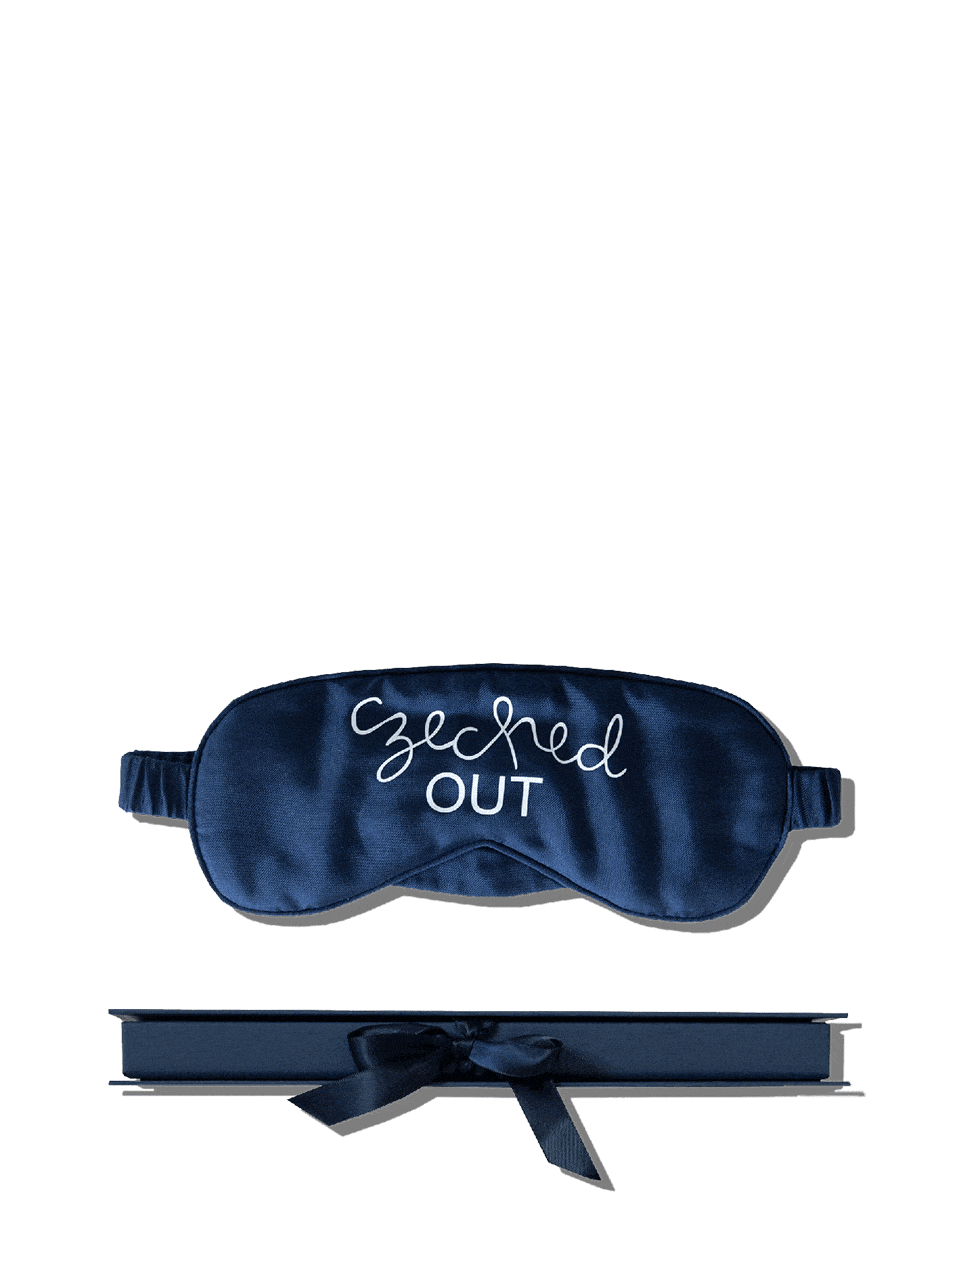 The Limited-Edition 'Czeched Out' Sleep Mask